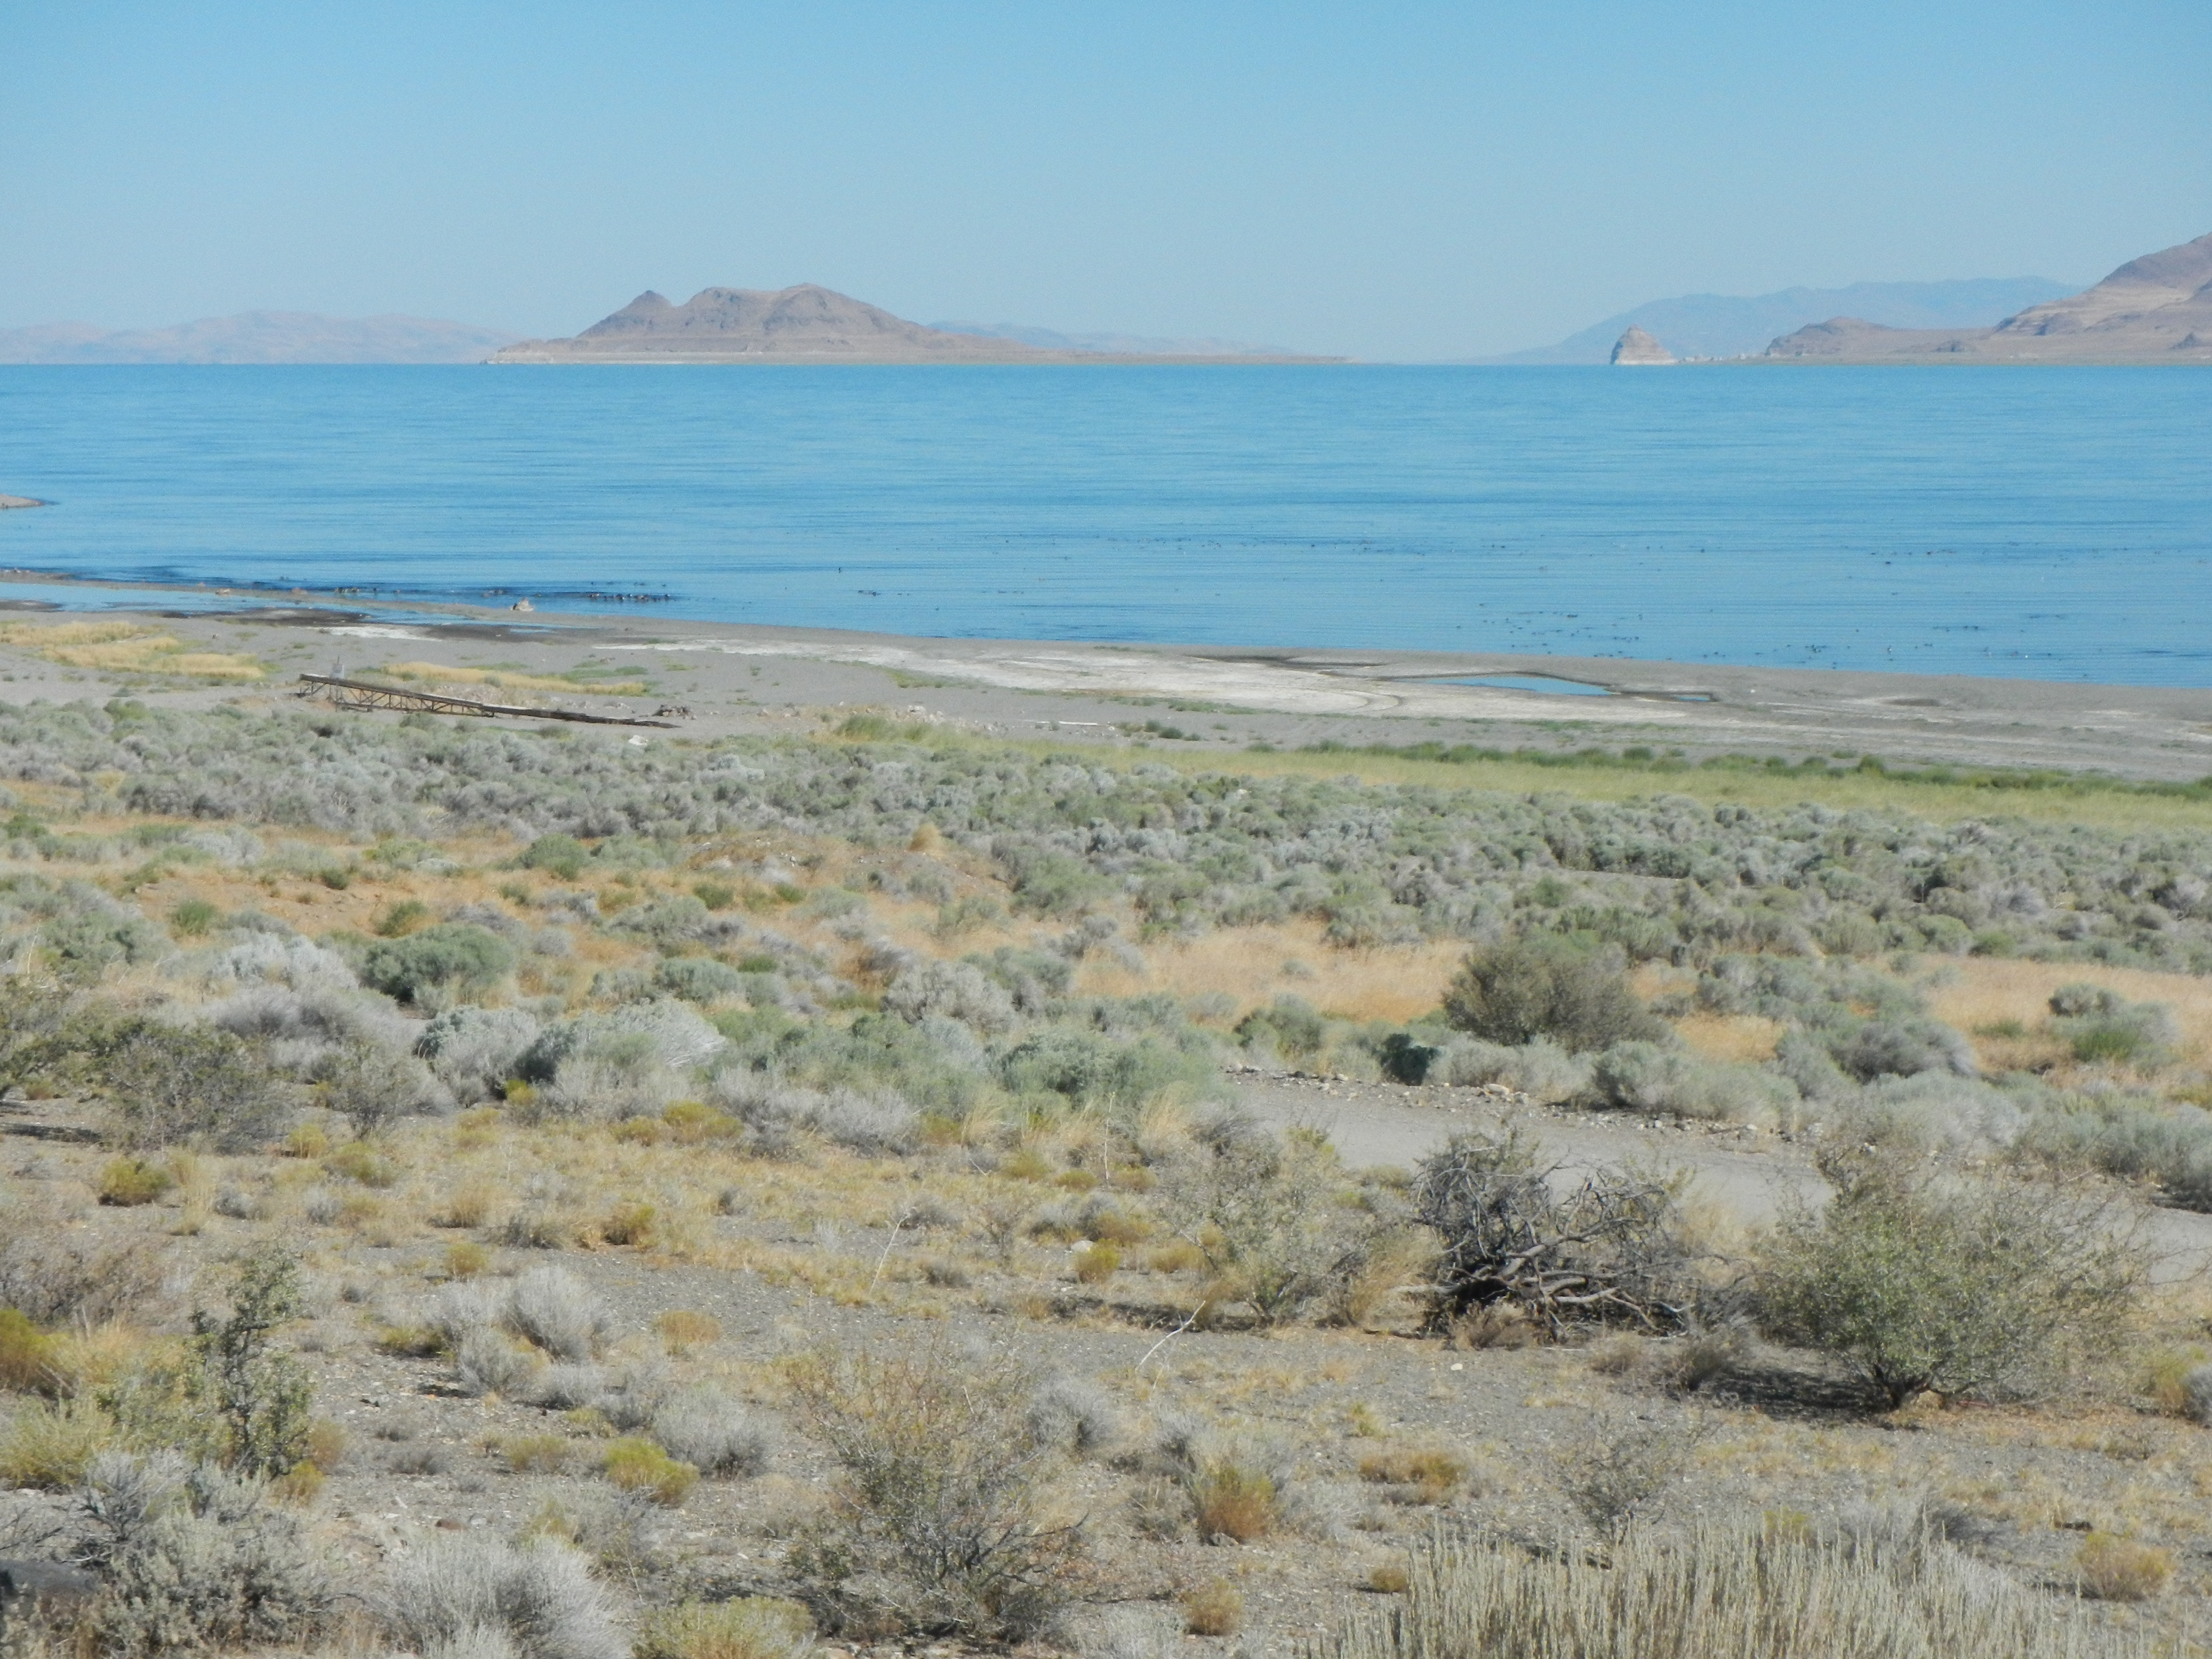 Pyramid Lake from the south